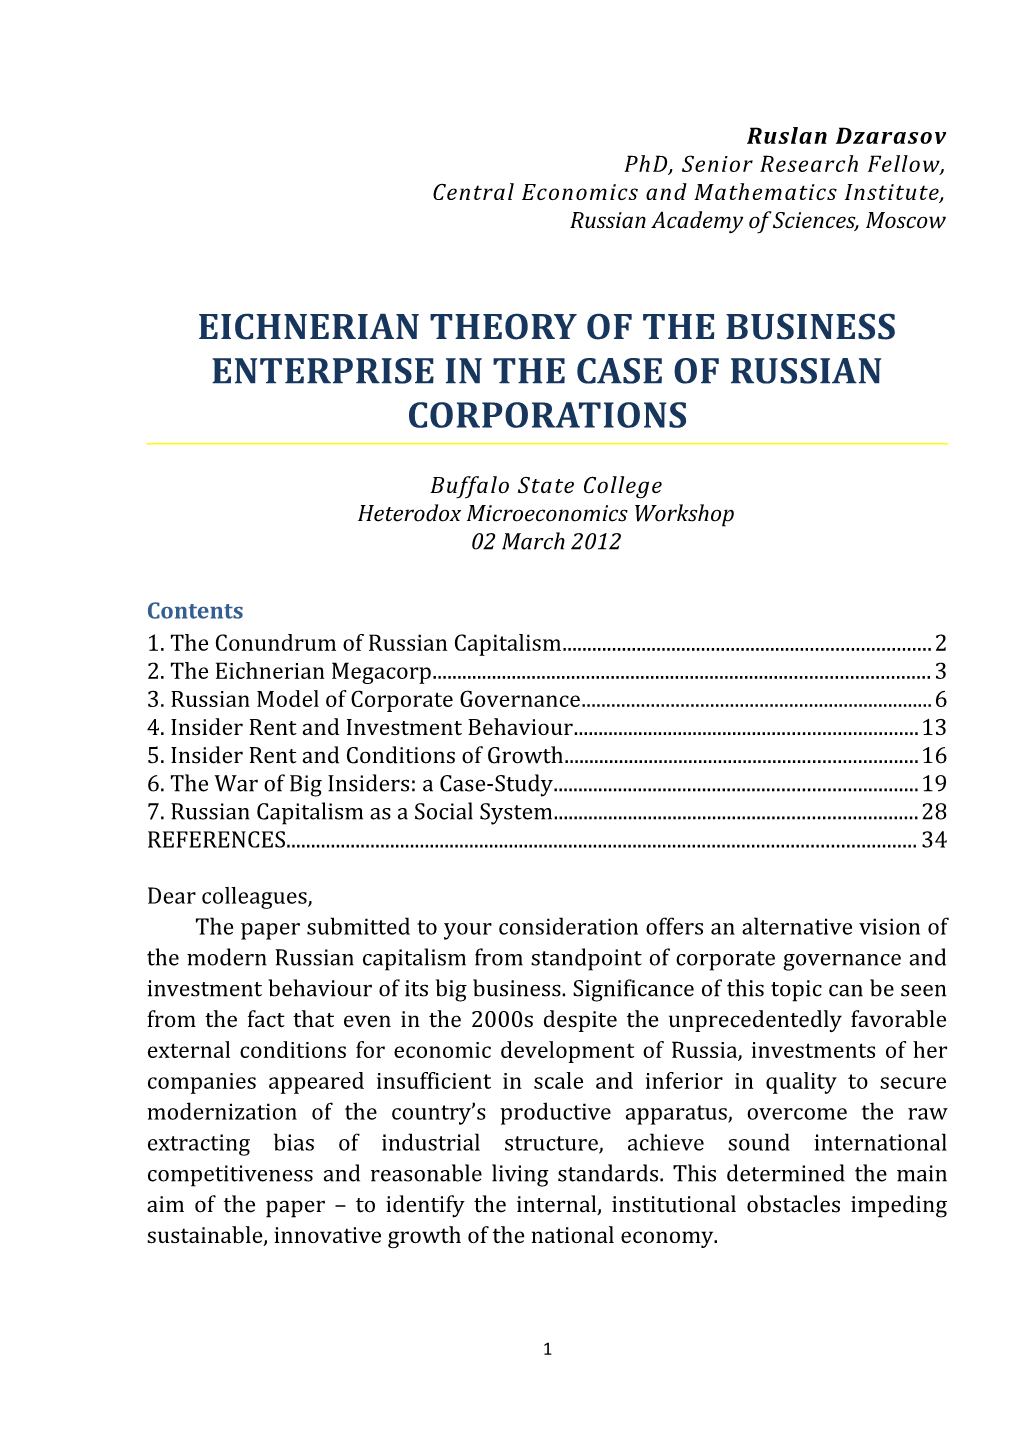 Dzarasov R. Eichnerian Theory of the Business Enterprise in the Case of Russian Corporations